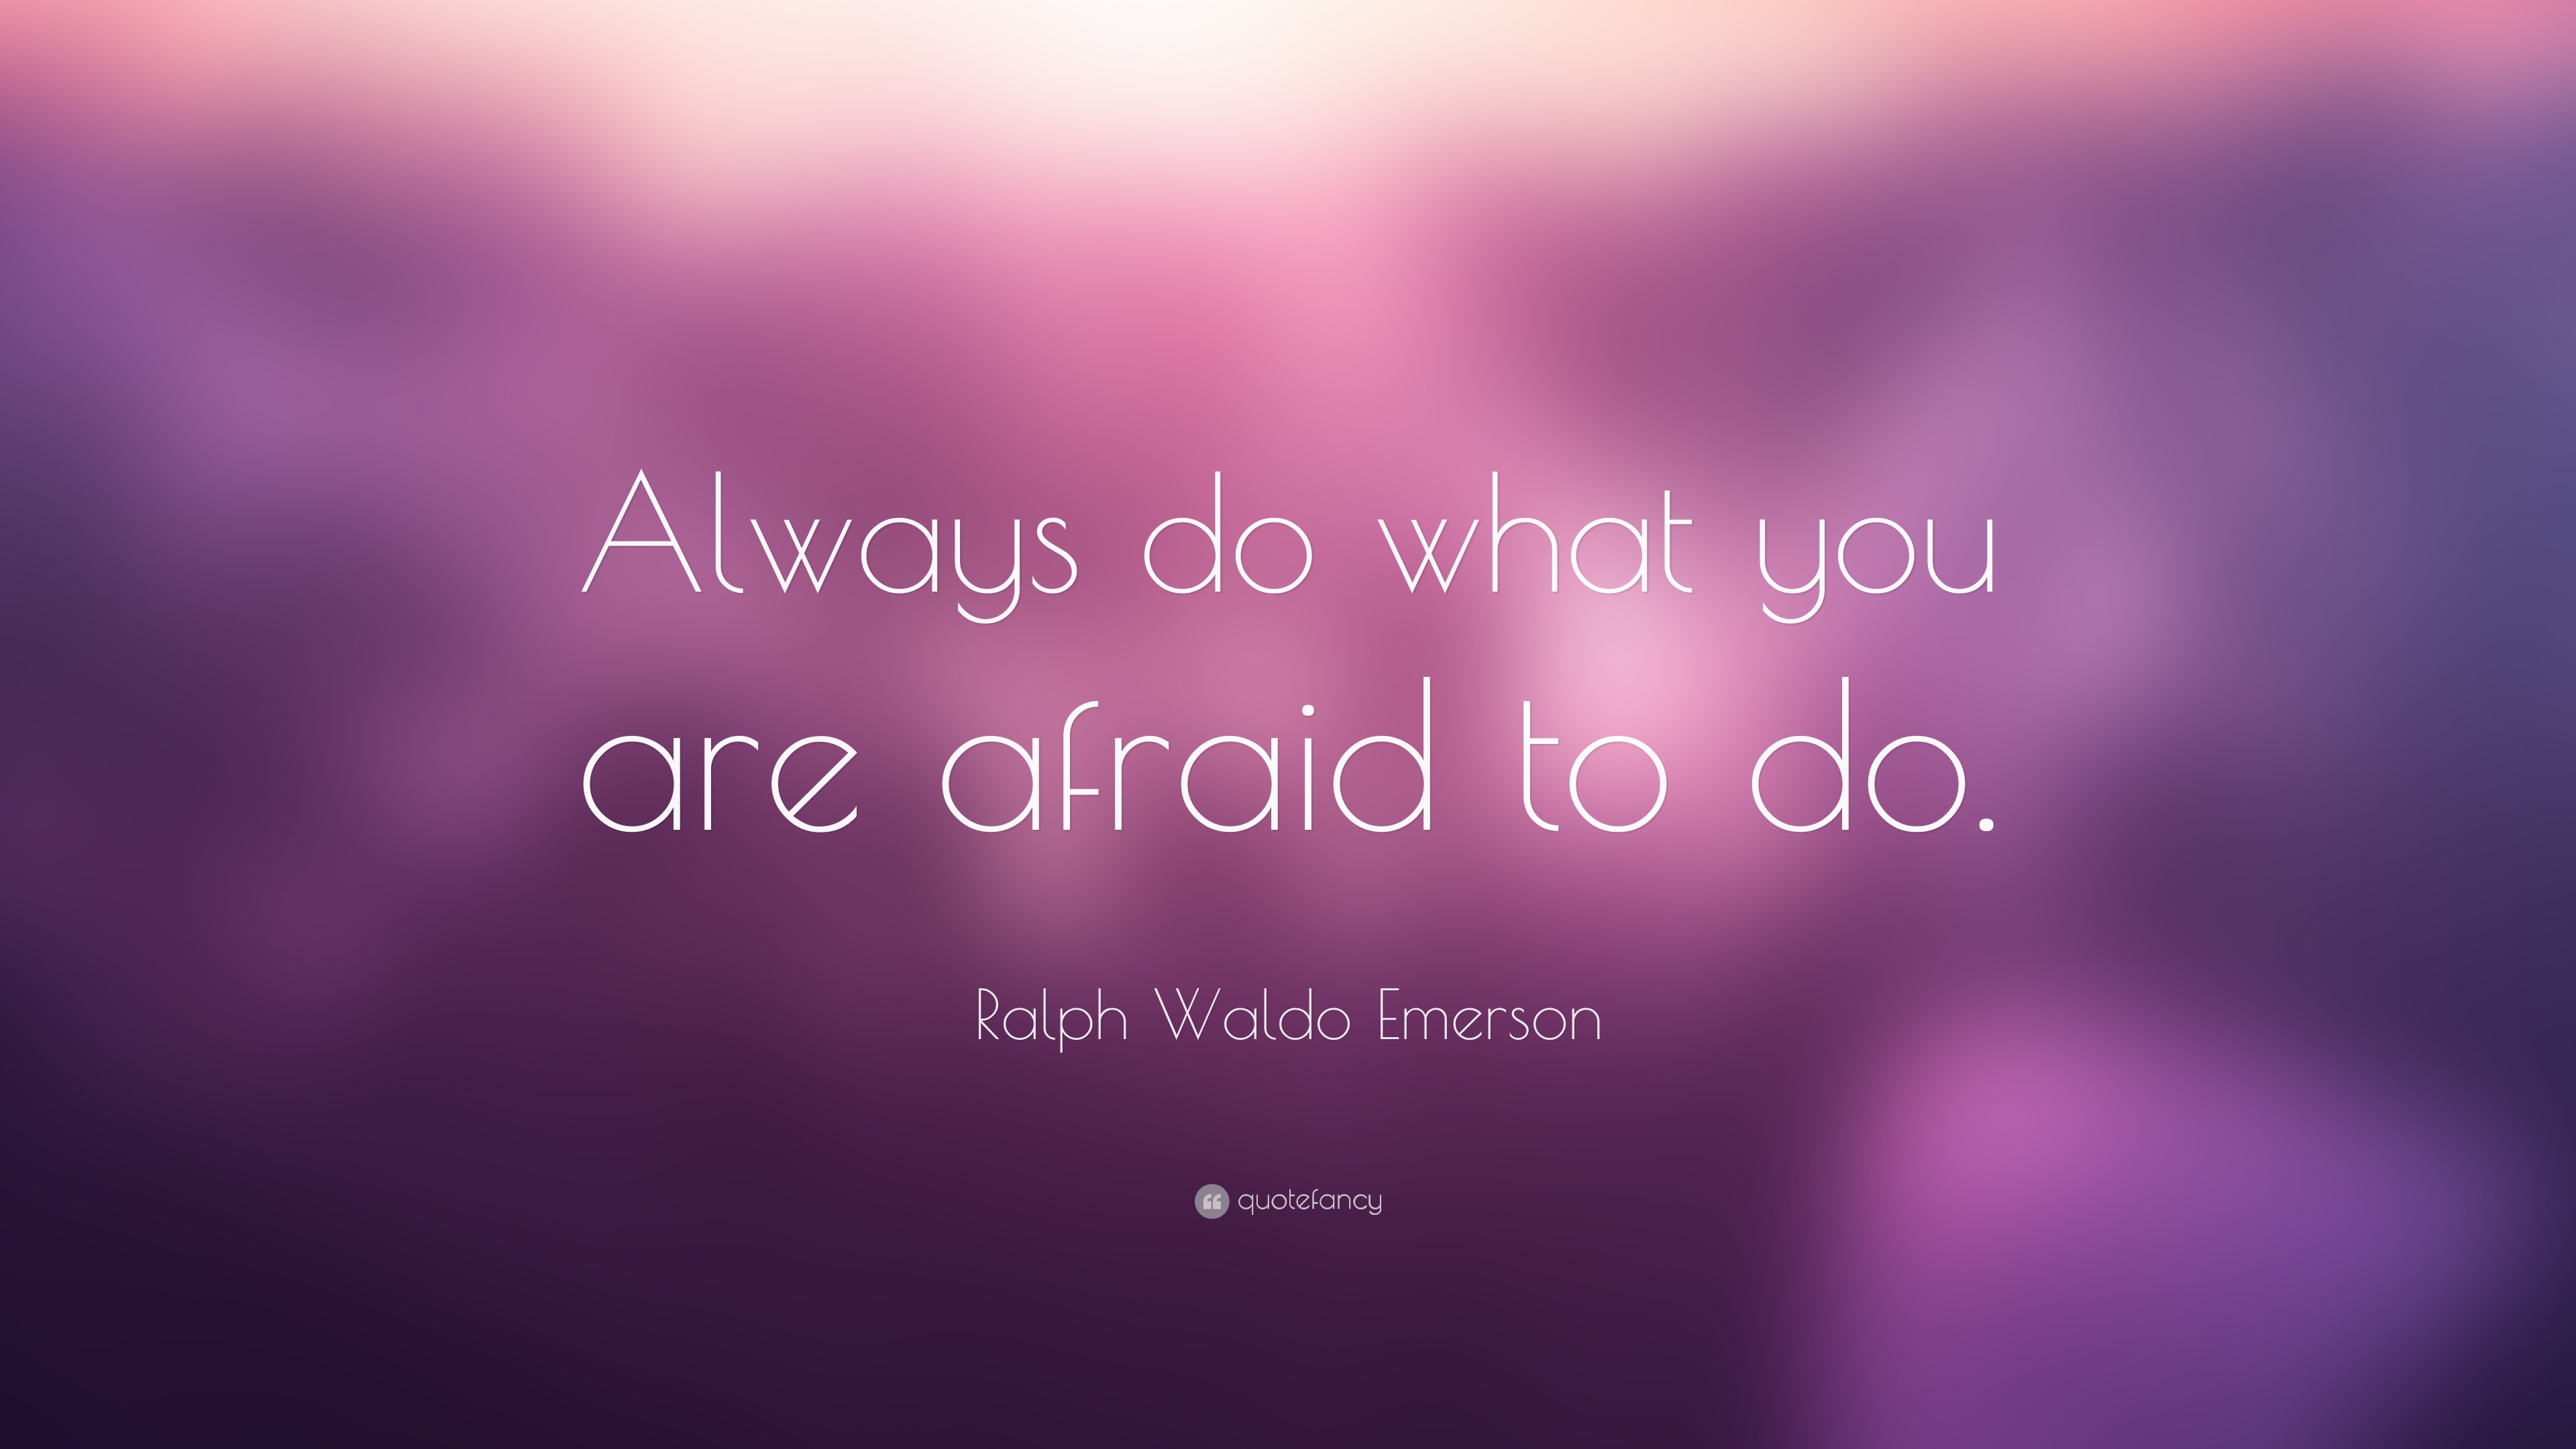 Ralph Waldo Emerson Quote: “Always do what you are afraid to do.”